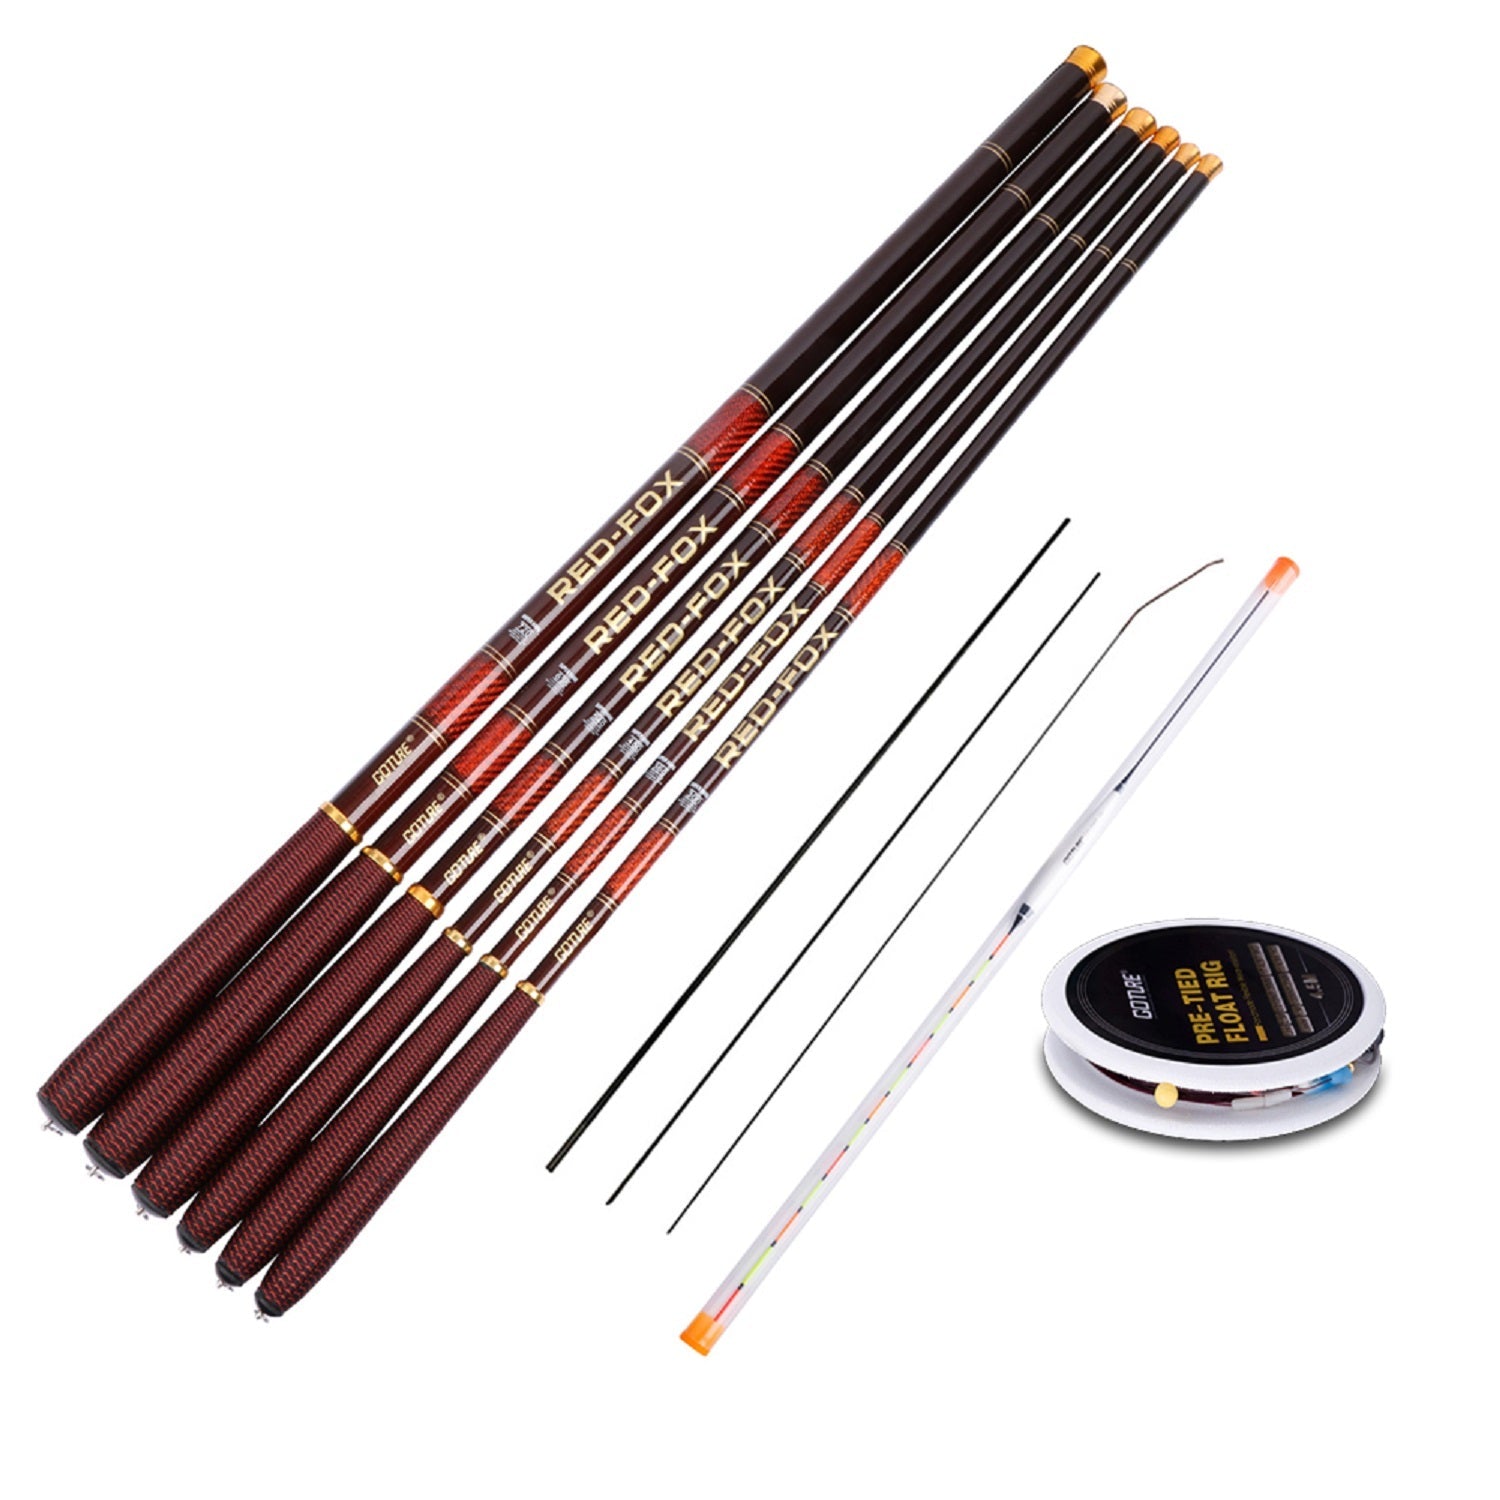 Goture Fishing Rod Repair Kit Complete with Glue Carbon Fiber